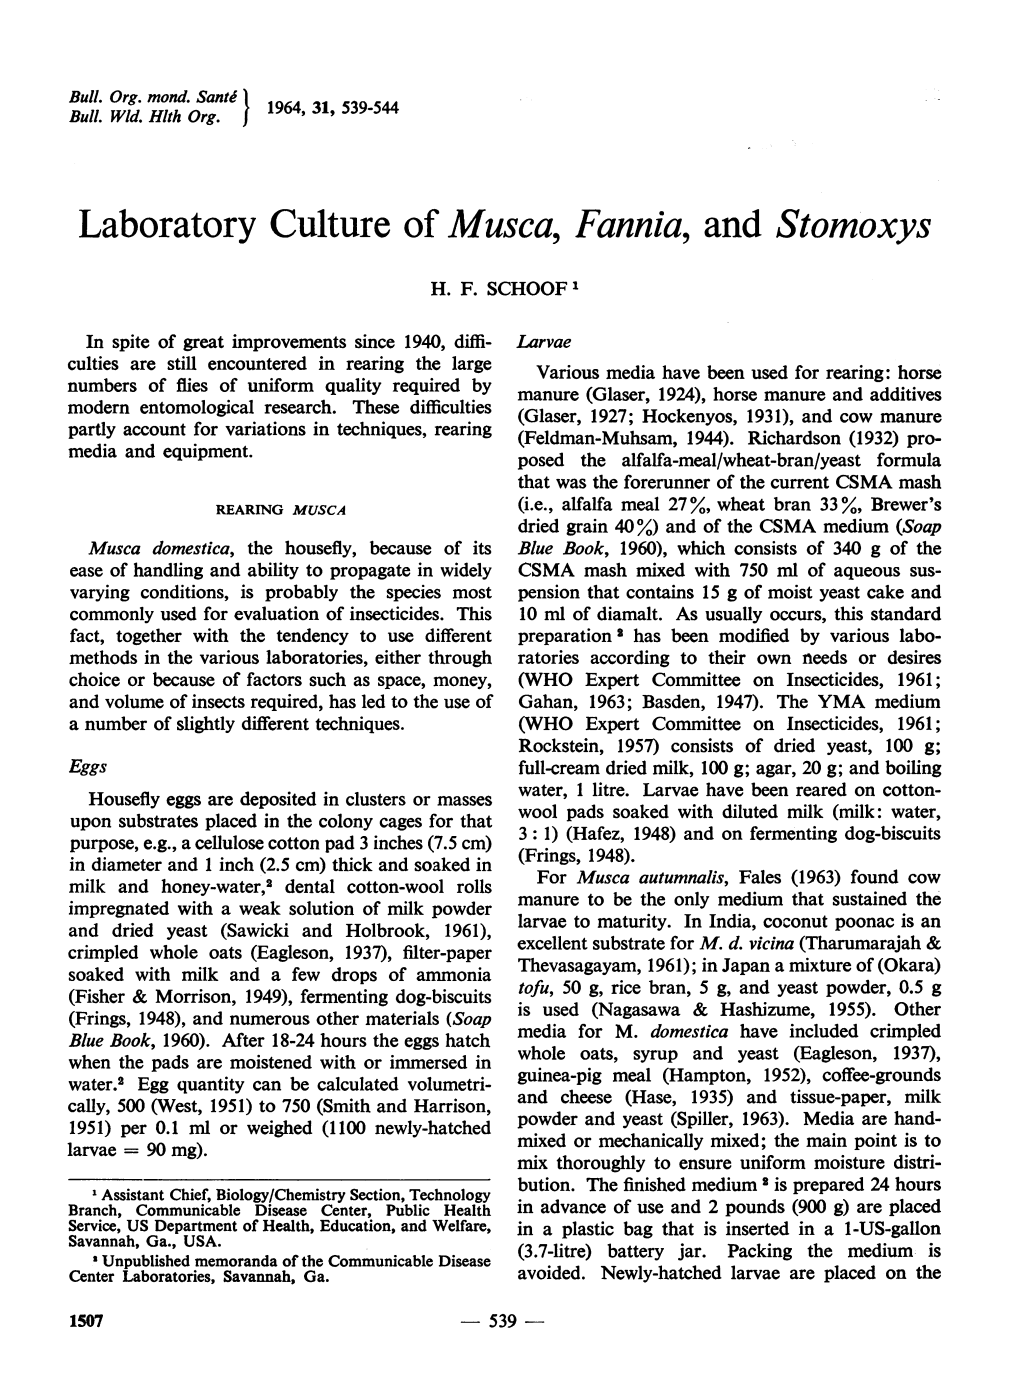 Laboratory Culture of Musca, Fannia, and Stomoxys